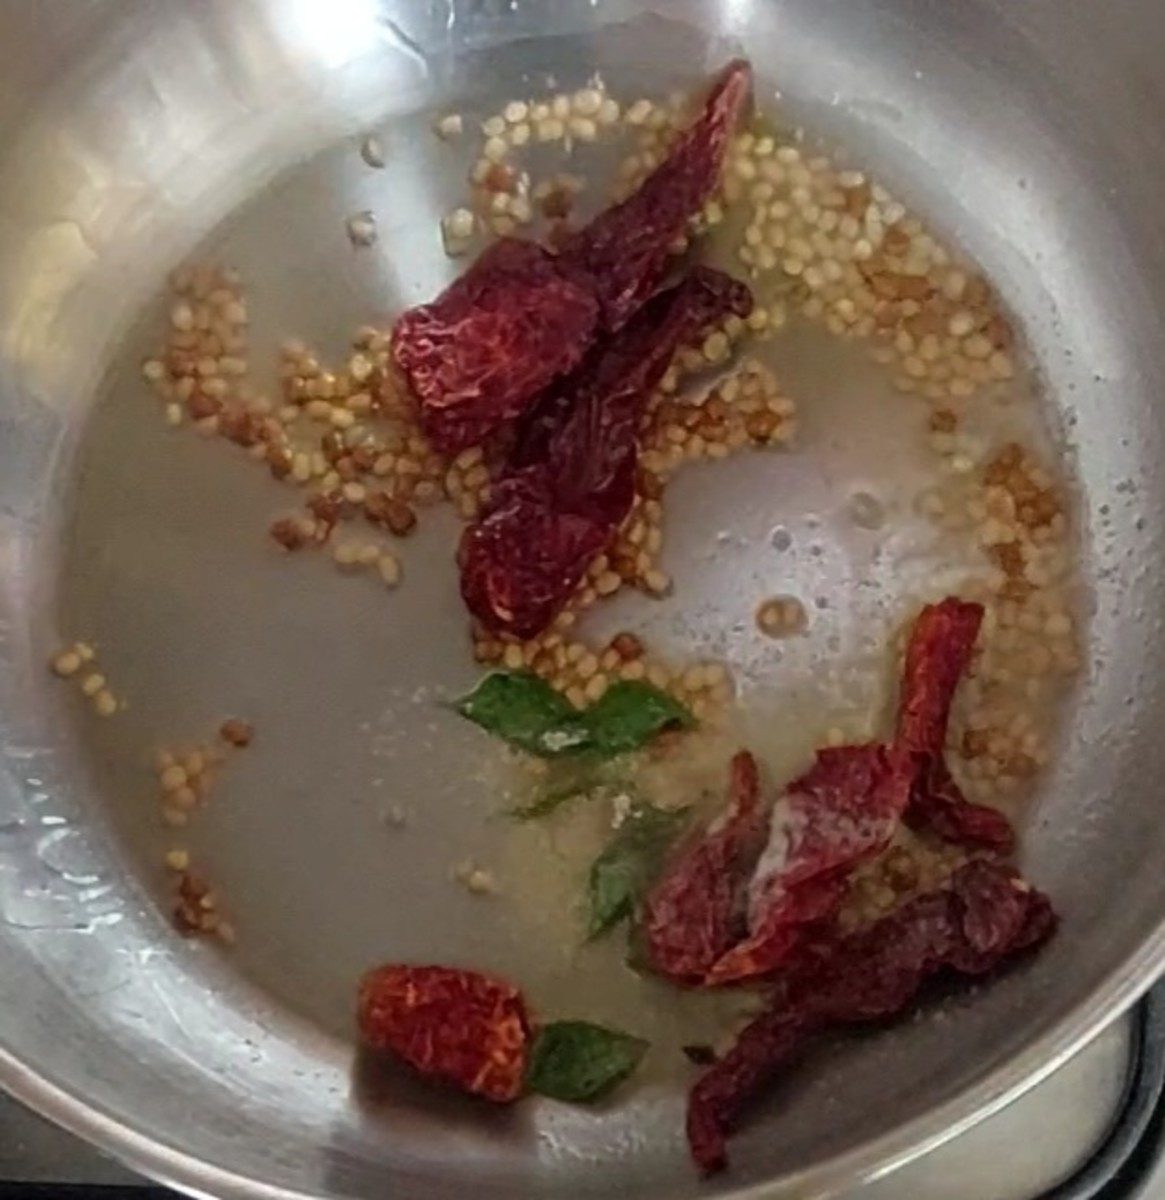 Add 4–5 Byadagi red chilies and saute for a few seconds. Add a sprig of curry leaves and 1/4 teaspoon hing. Fry for a few seconds.